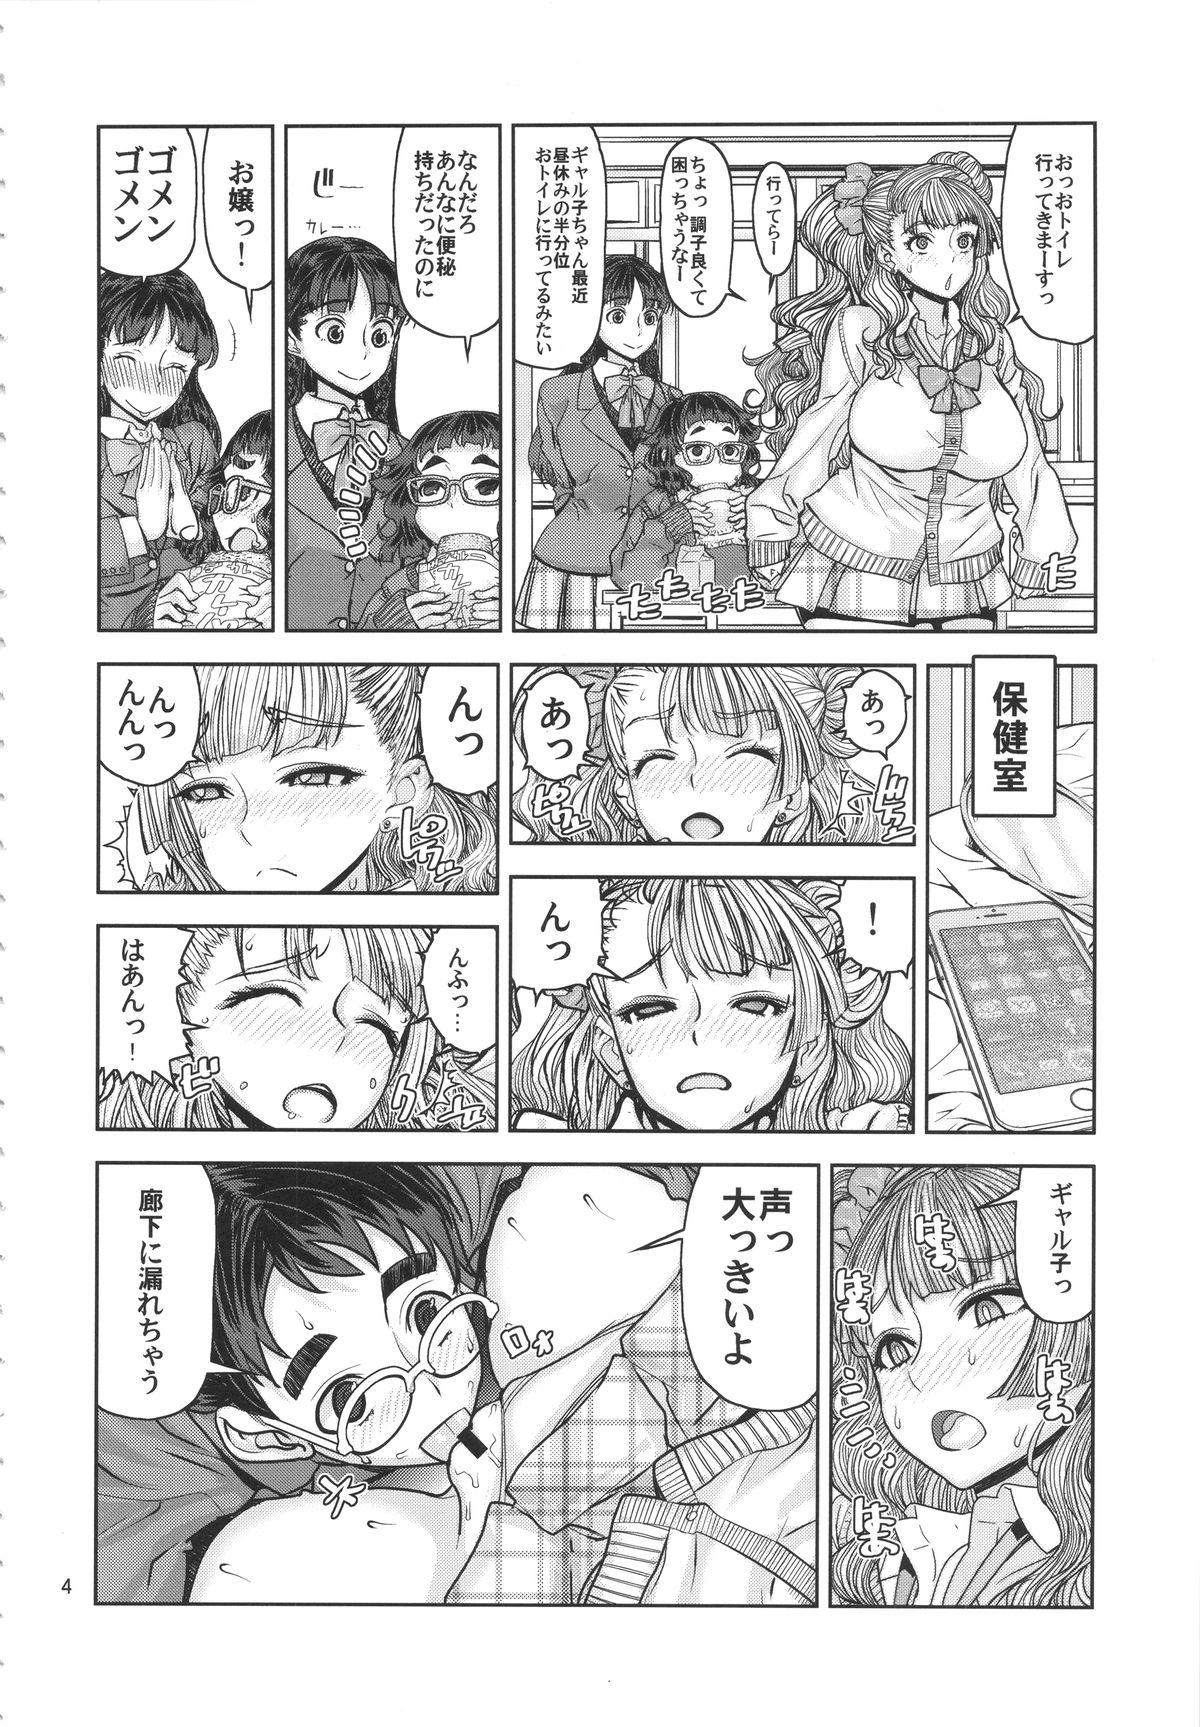 Hot Cunt Leopard Hon 23 no 2 - Oshiete galko-chan Skype - Page 3